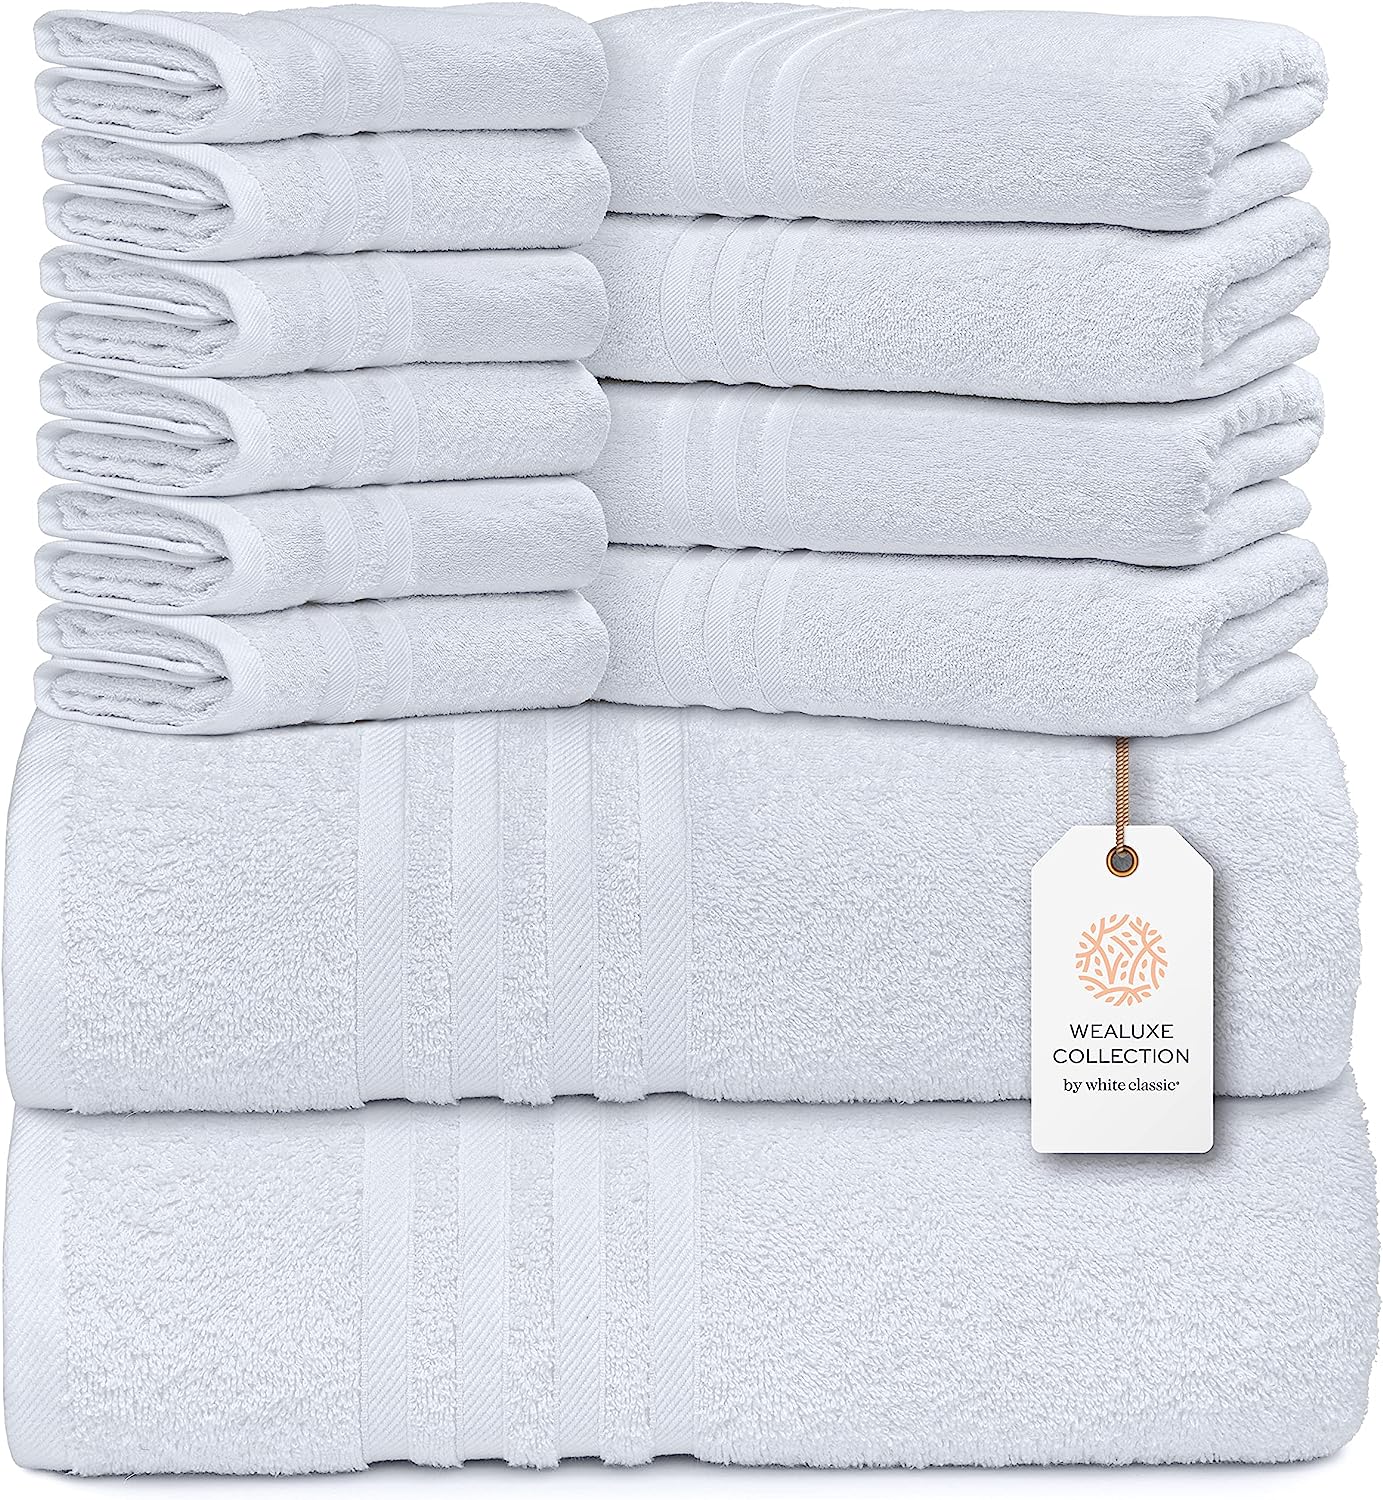 Welauxe Collection 8Pc White Towel Set